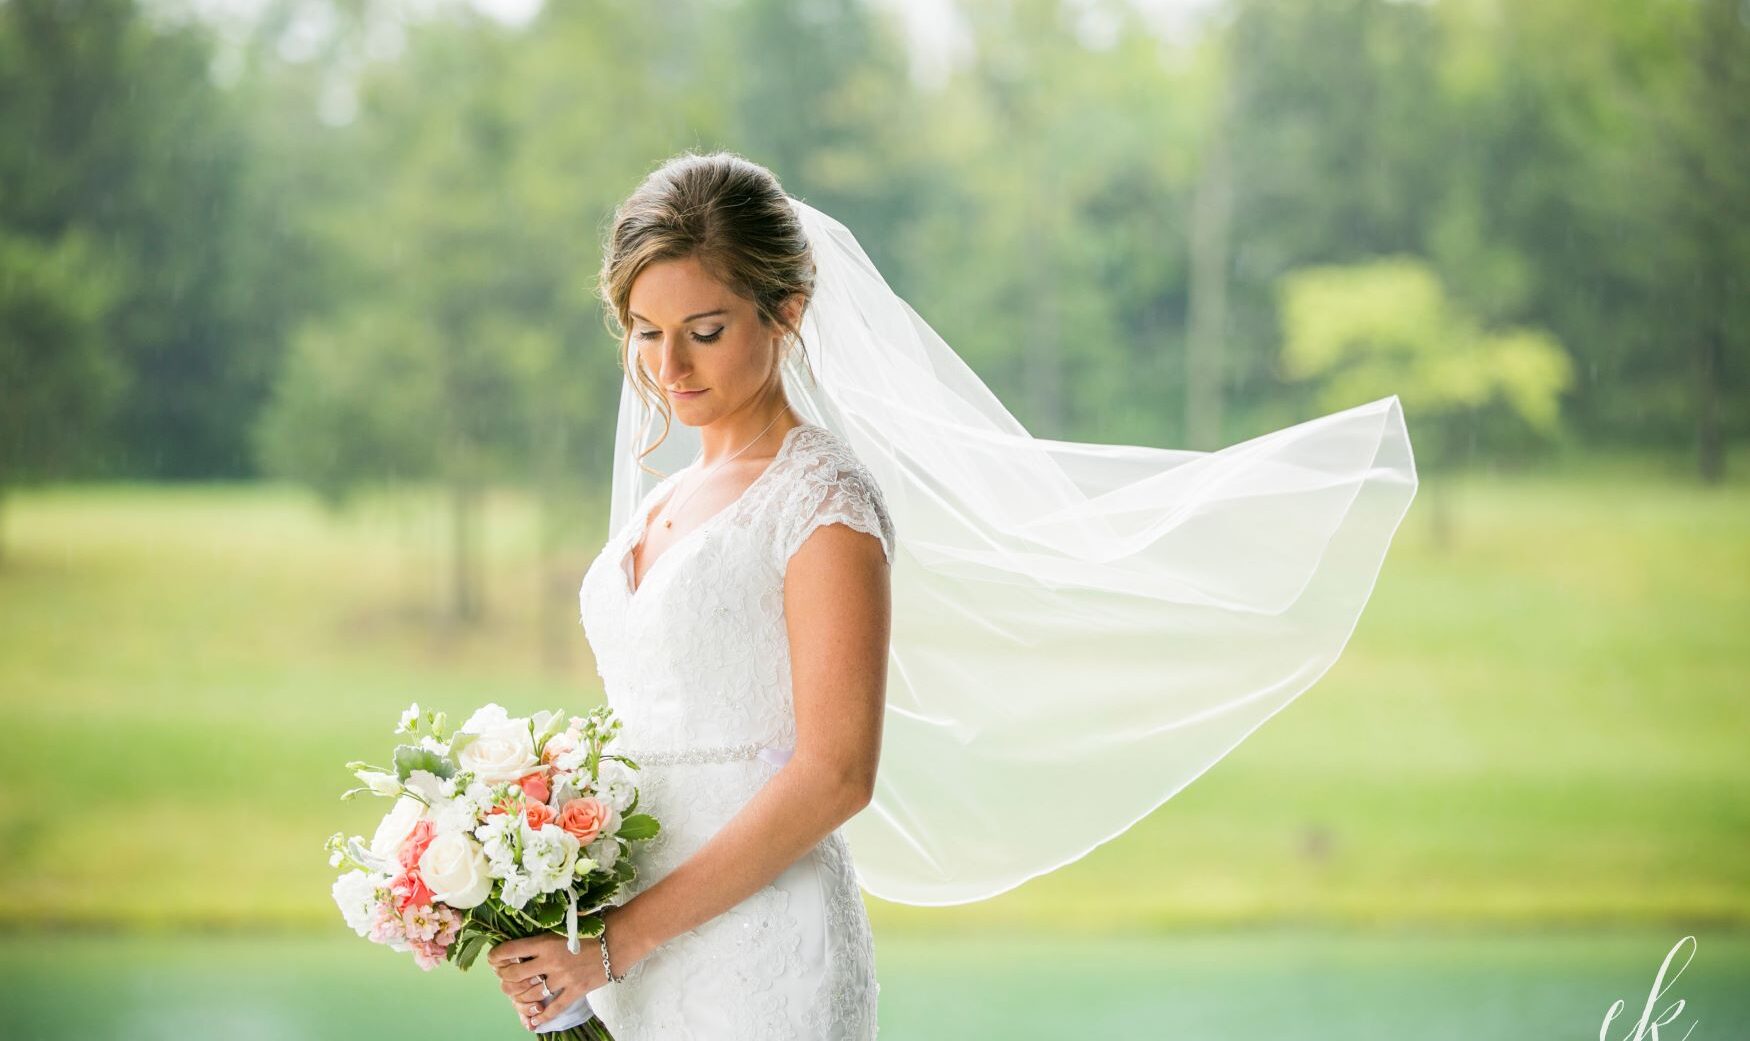 bride with veil blowing in the wind, in front of pond